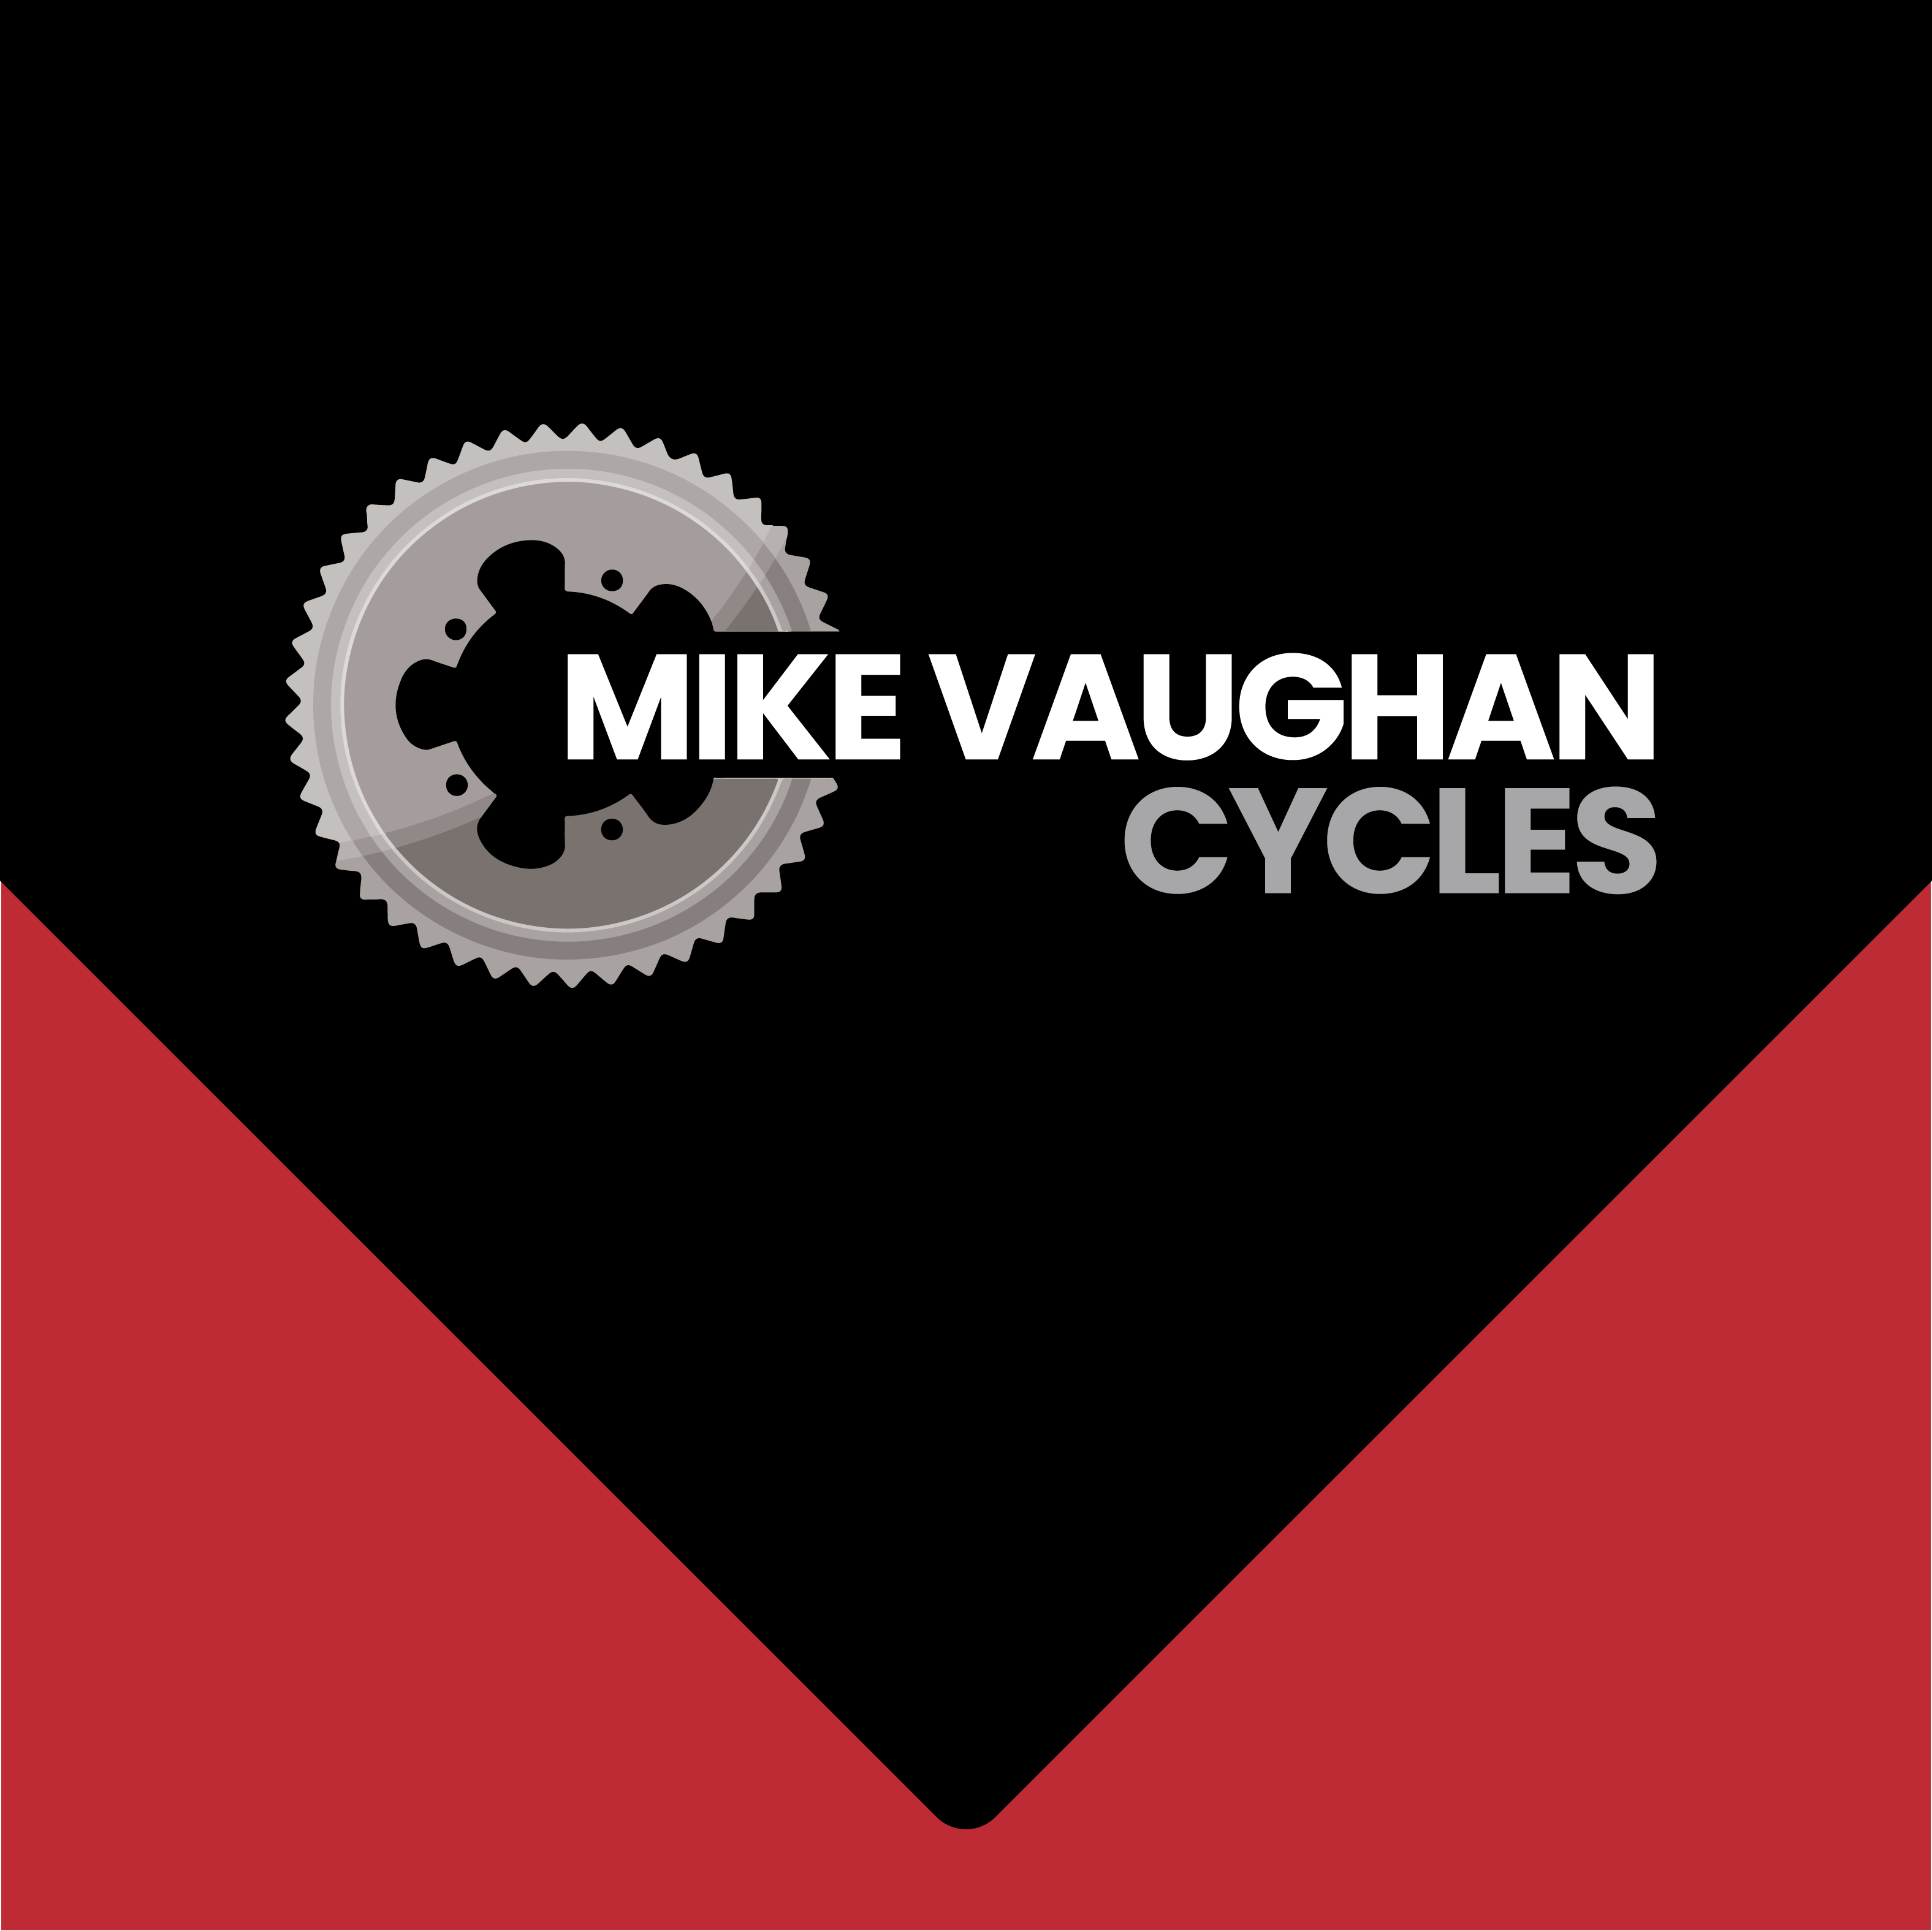 Club Image for MIKE VAUGHAN CYCLES